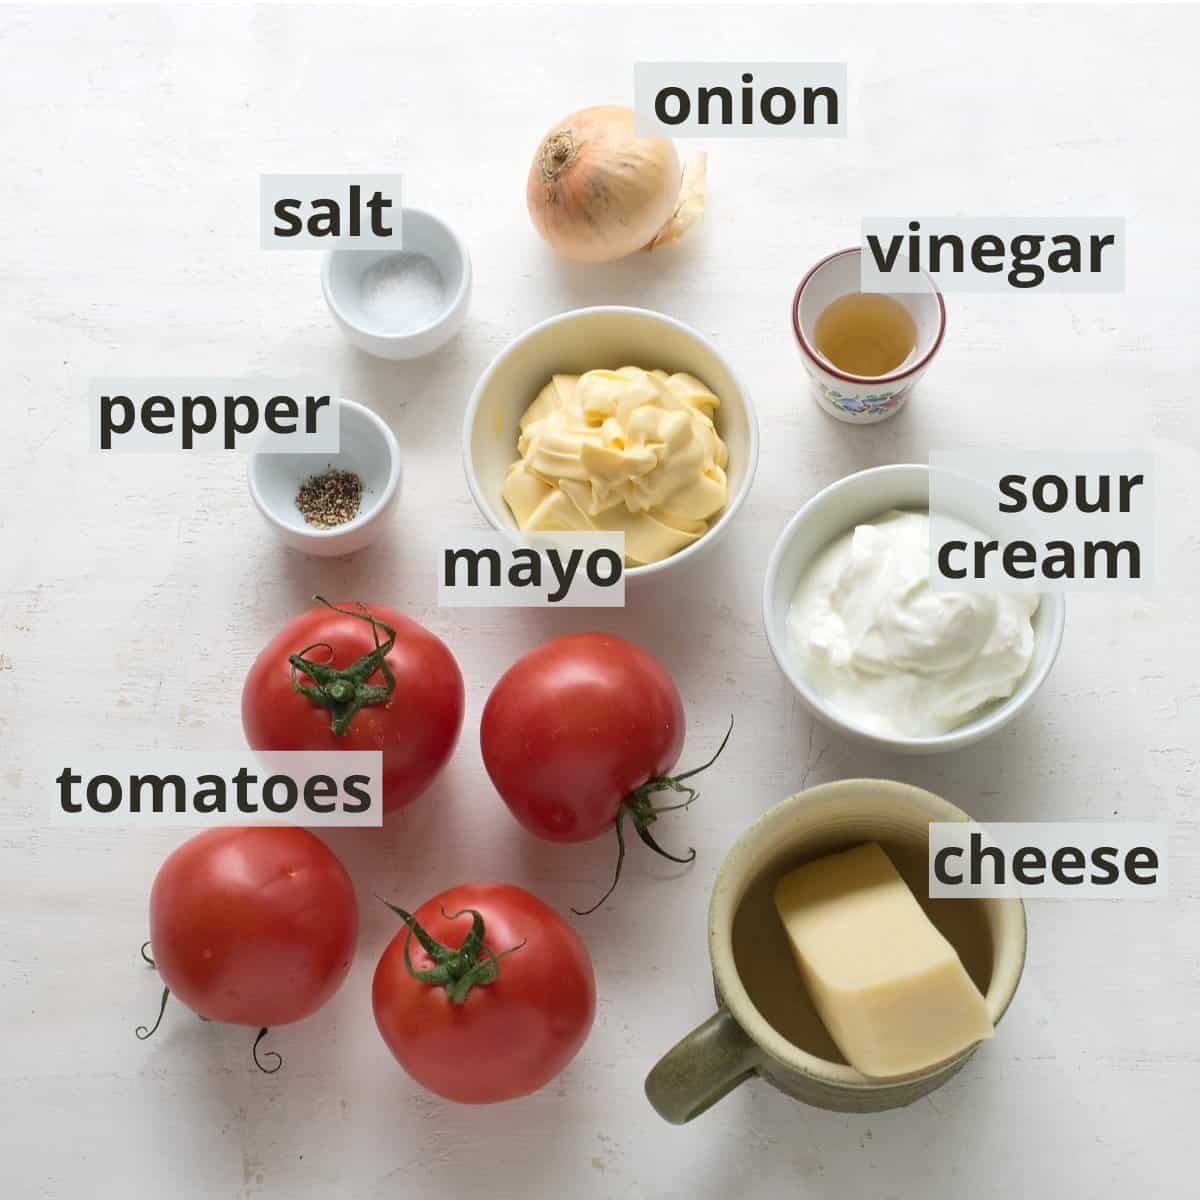 Ingredients for tomato salad with cheese, inclusive captions.